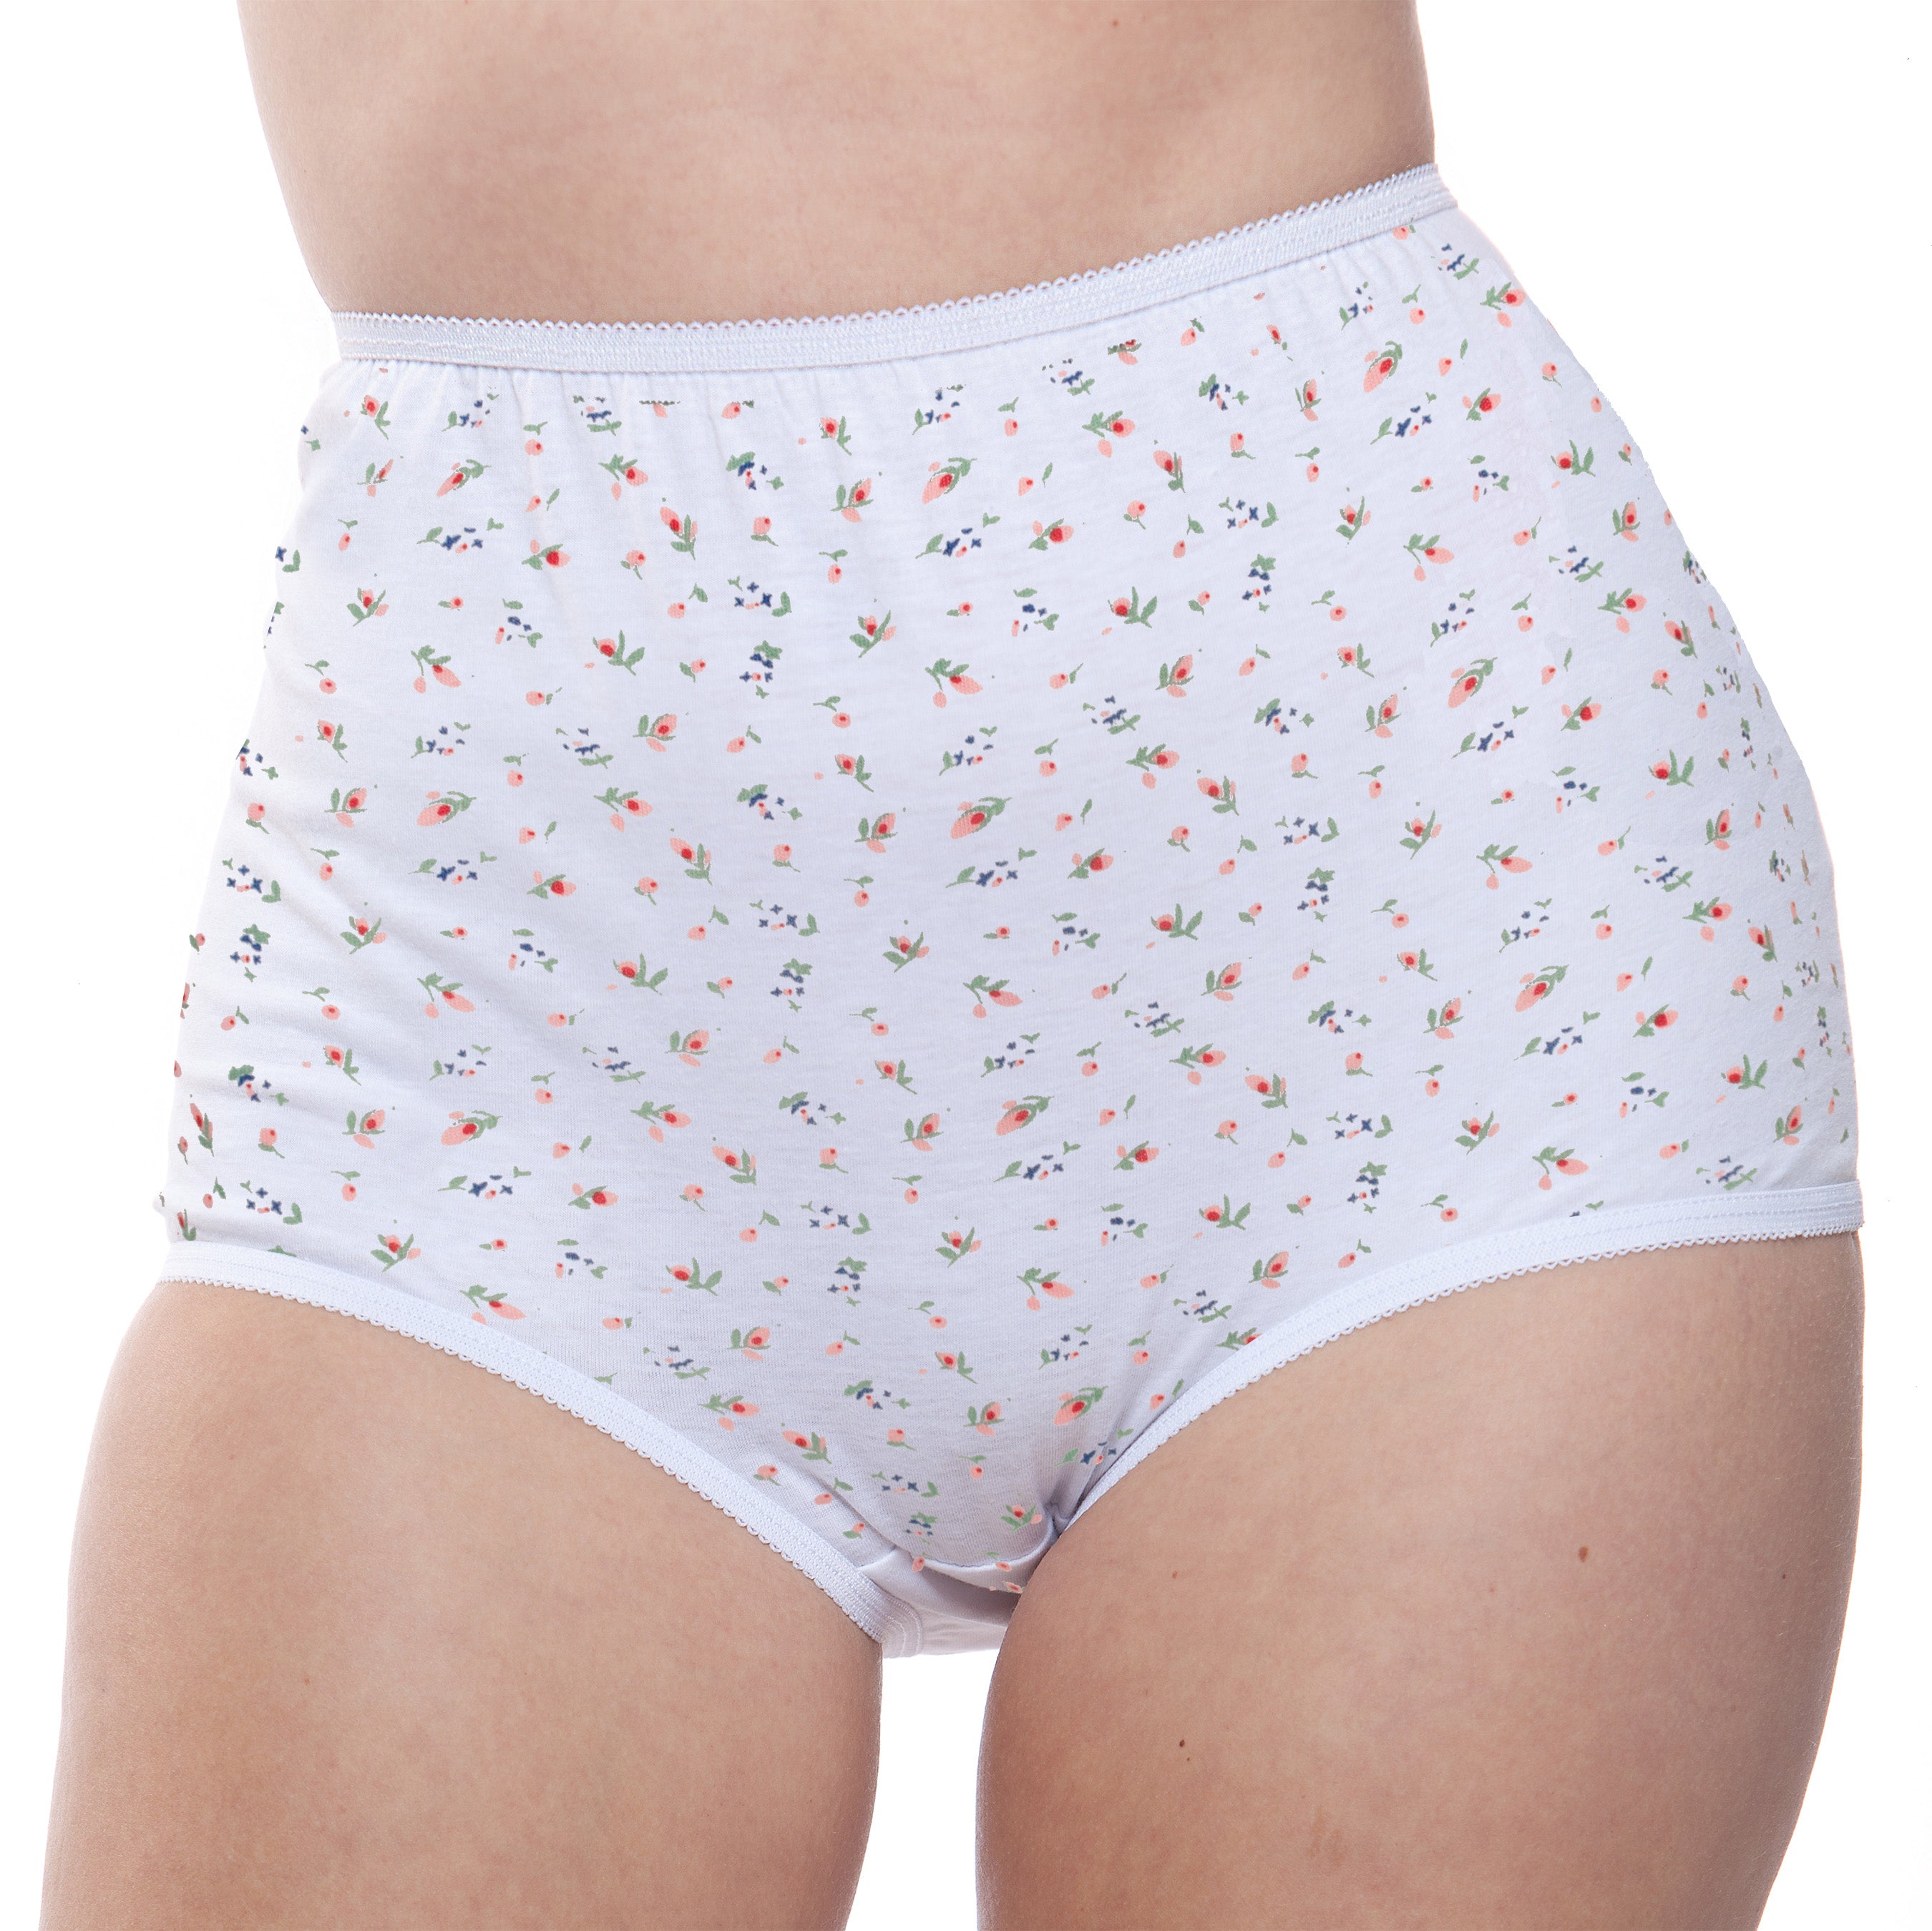 Full Coverage Panty Floral Print 6 Pack (100% Cotton)